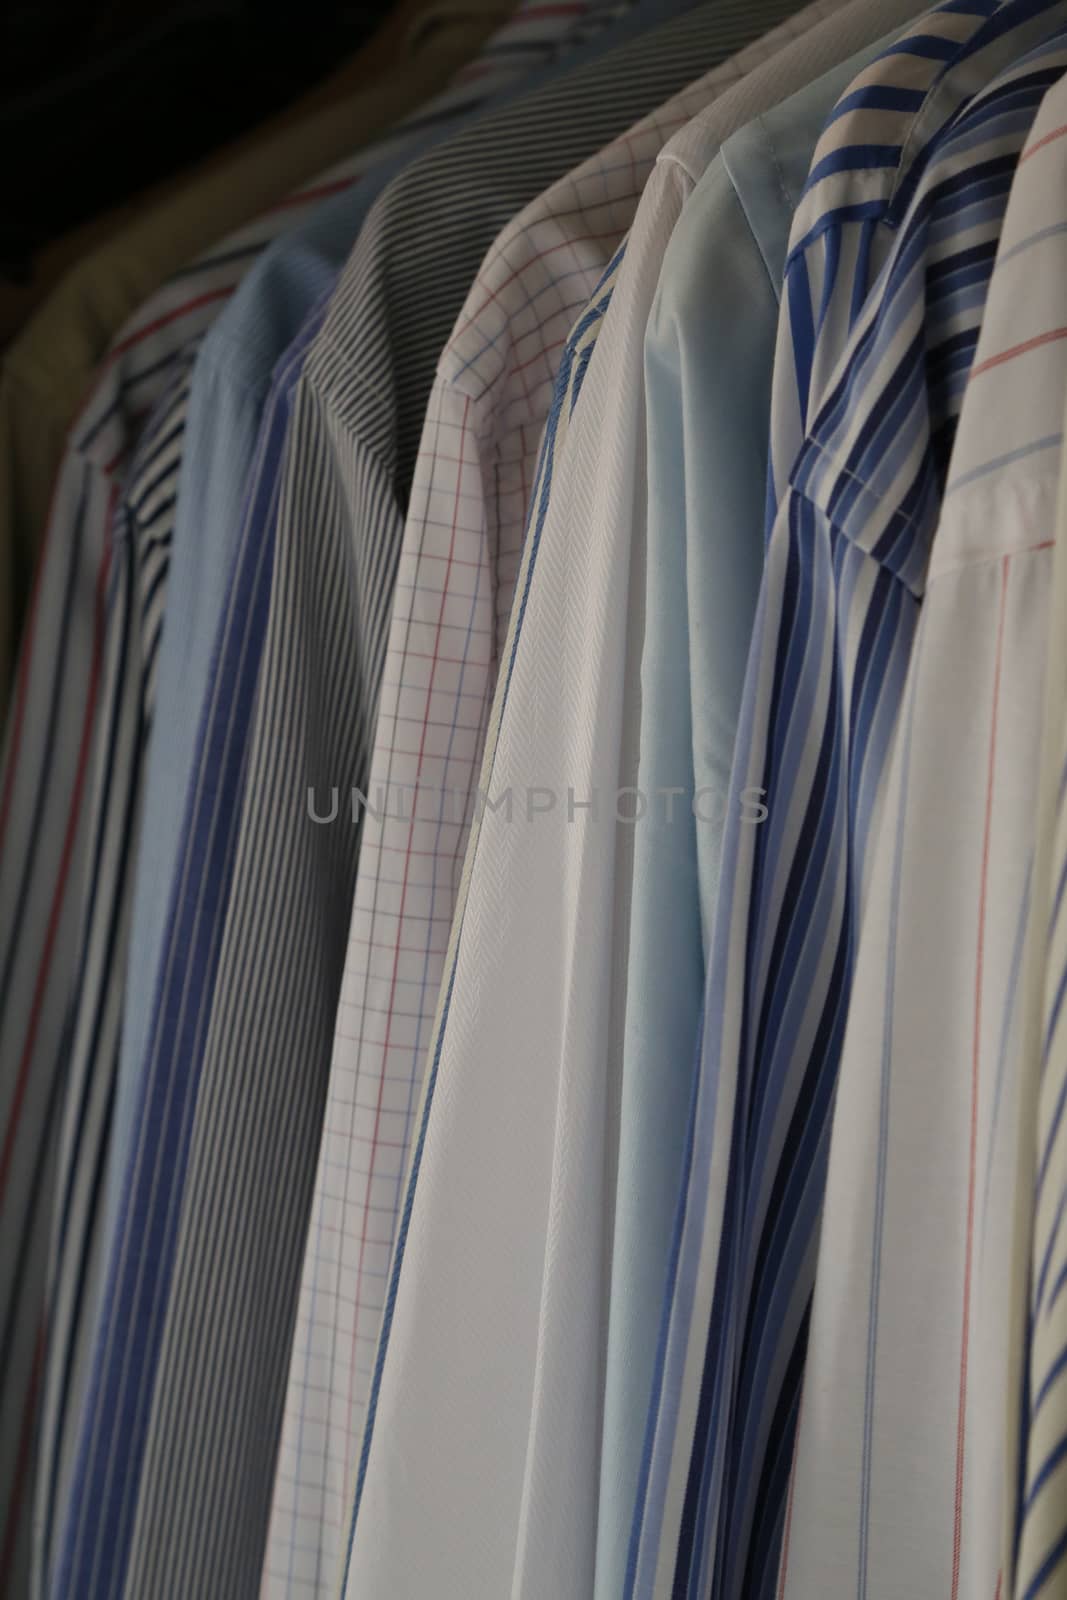 businessman's hanging shirts by tolikoff_photography